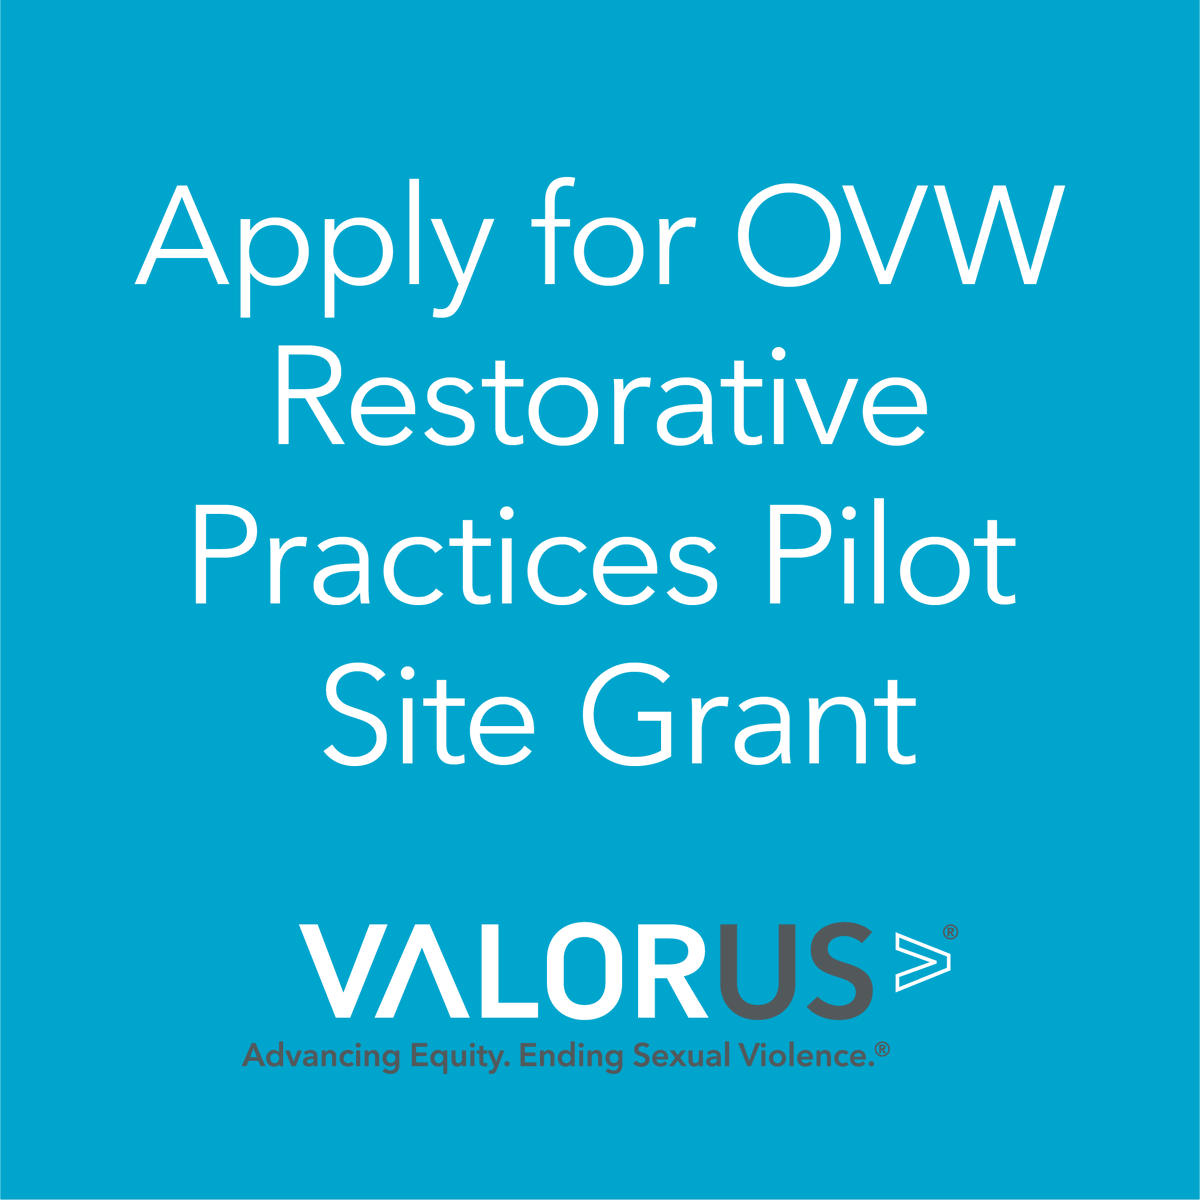 The US Office on Violence Against Women (OVW) has released the first-ever Restorative Practices Pilot Sites Program Solicitation. VALOR is excited to be a Training and Technical Assistance Provider on this important project! Interested? Visit ➡️ loom.ly/voMMFhQ